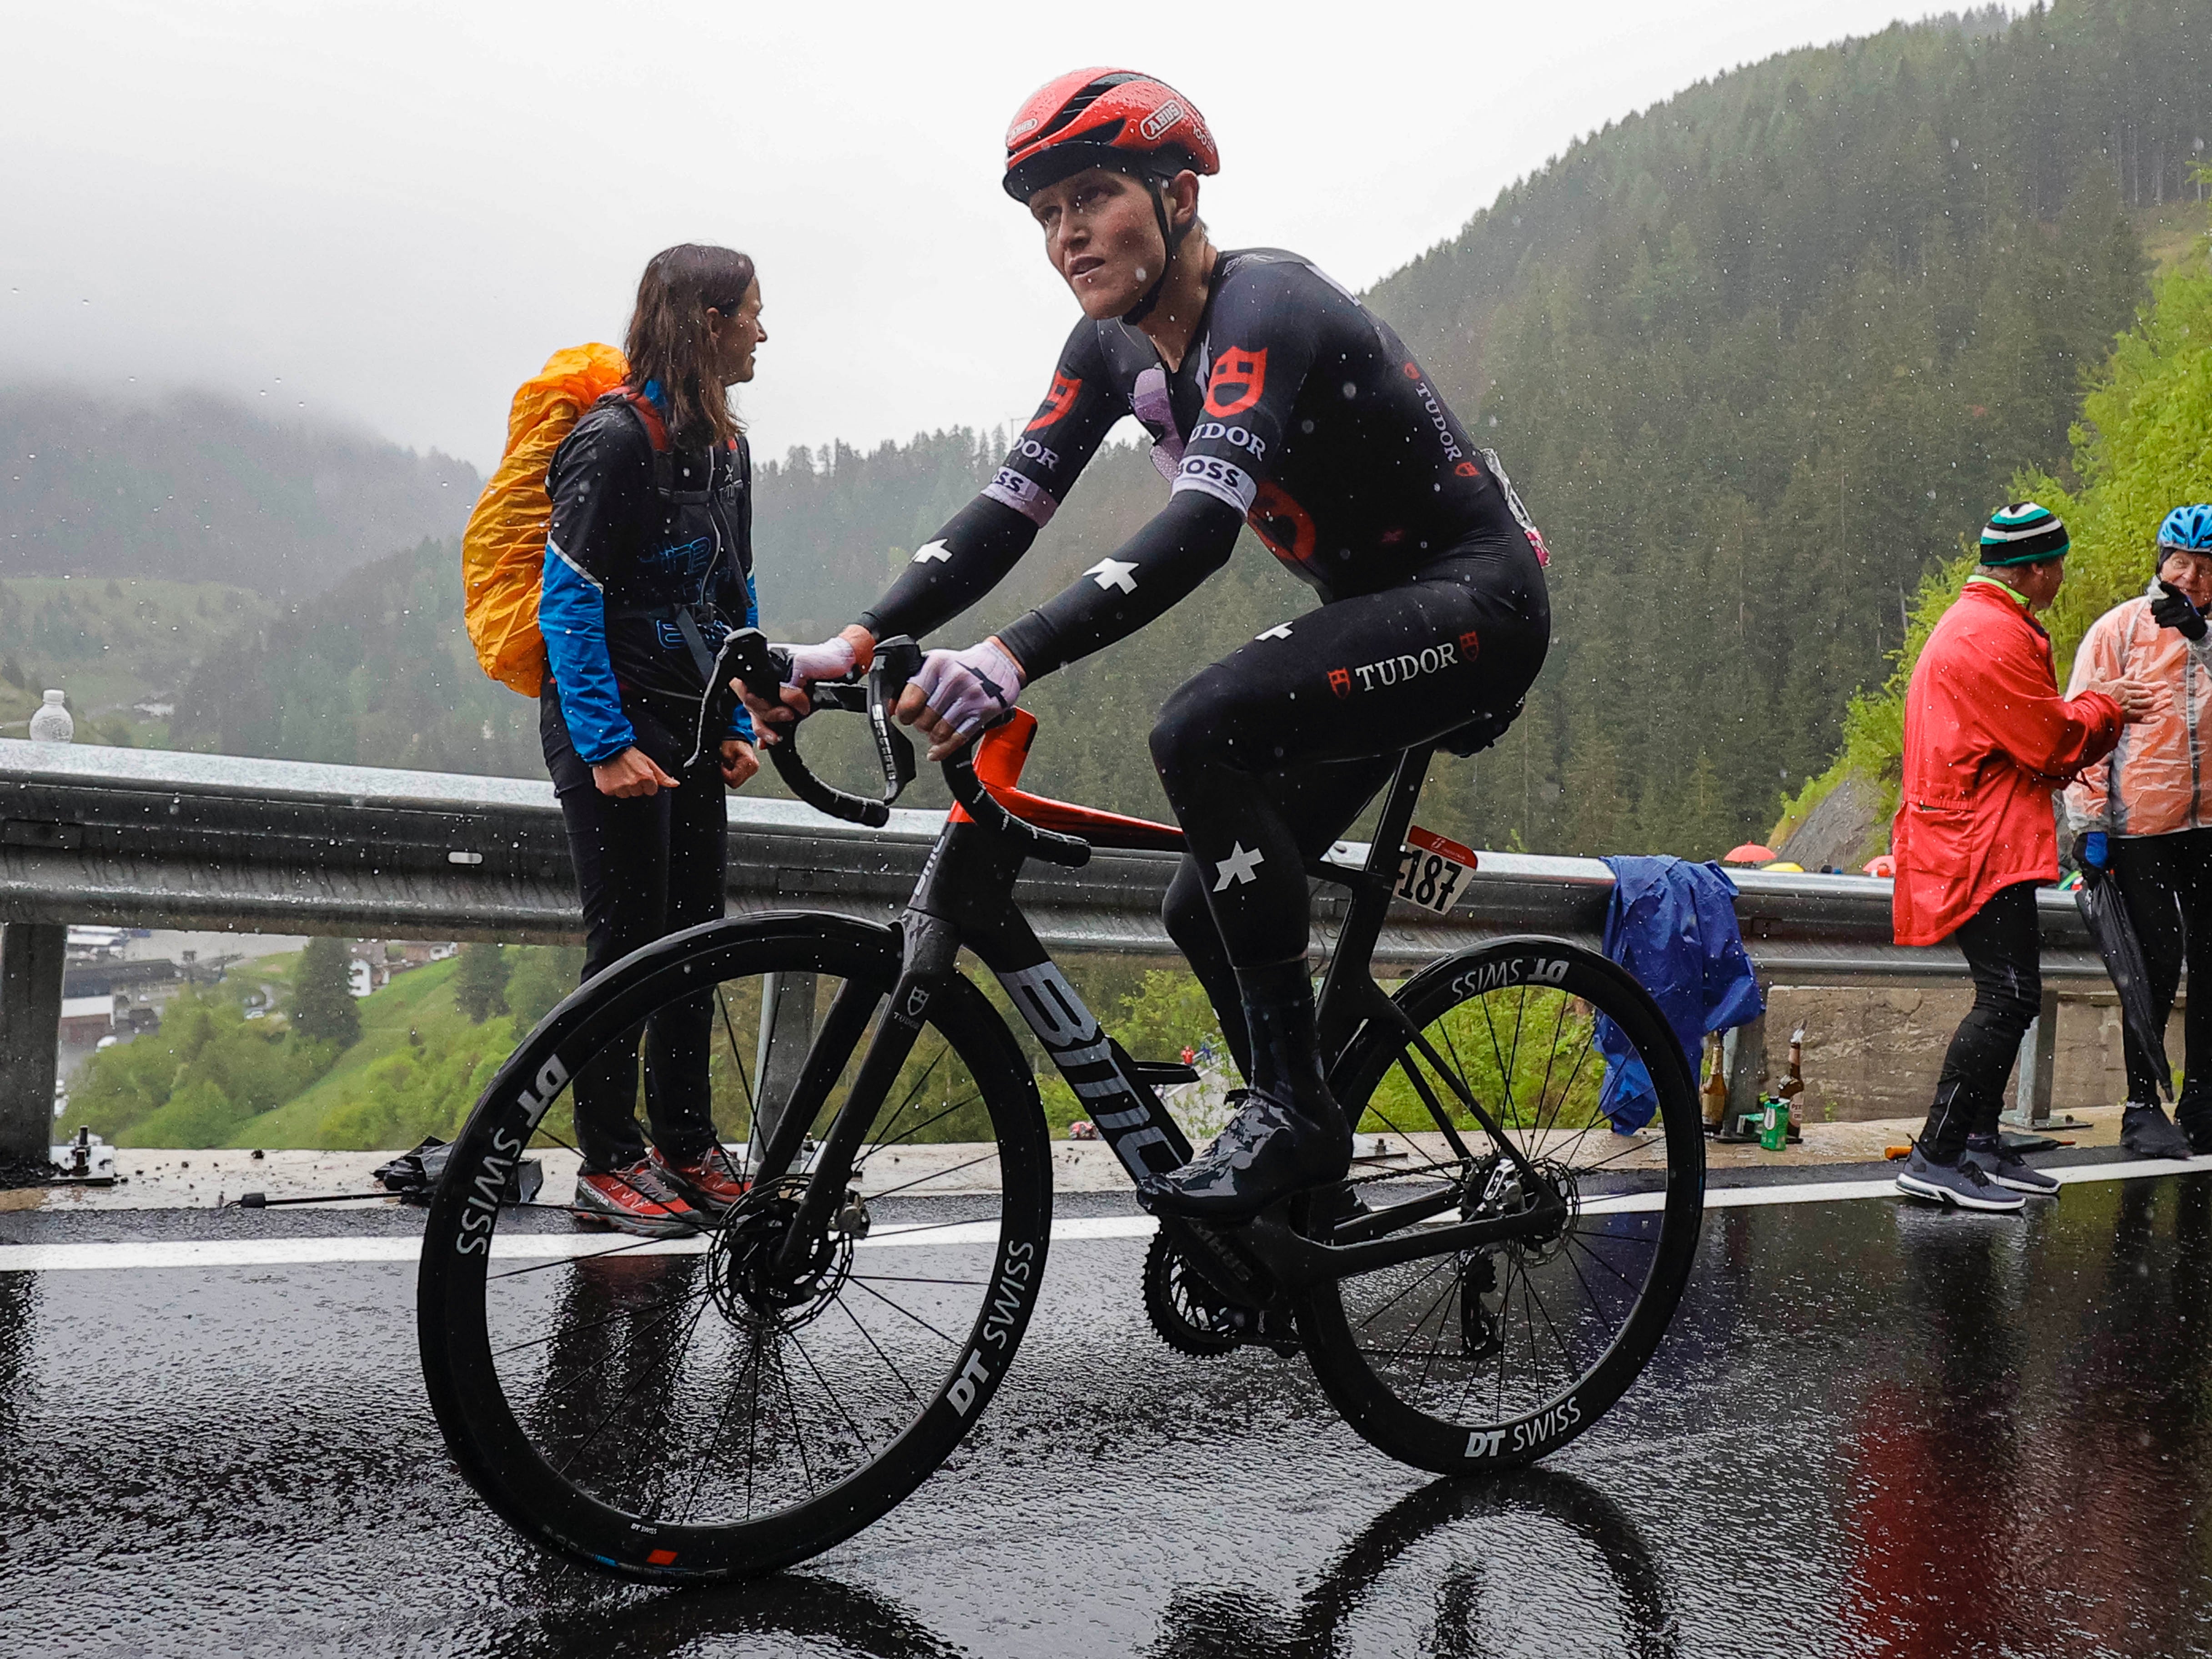 Tudor Pro Cycling continues to score top 10 finishes in Giro d'Italia